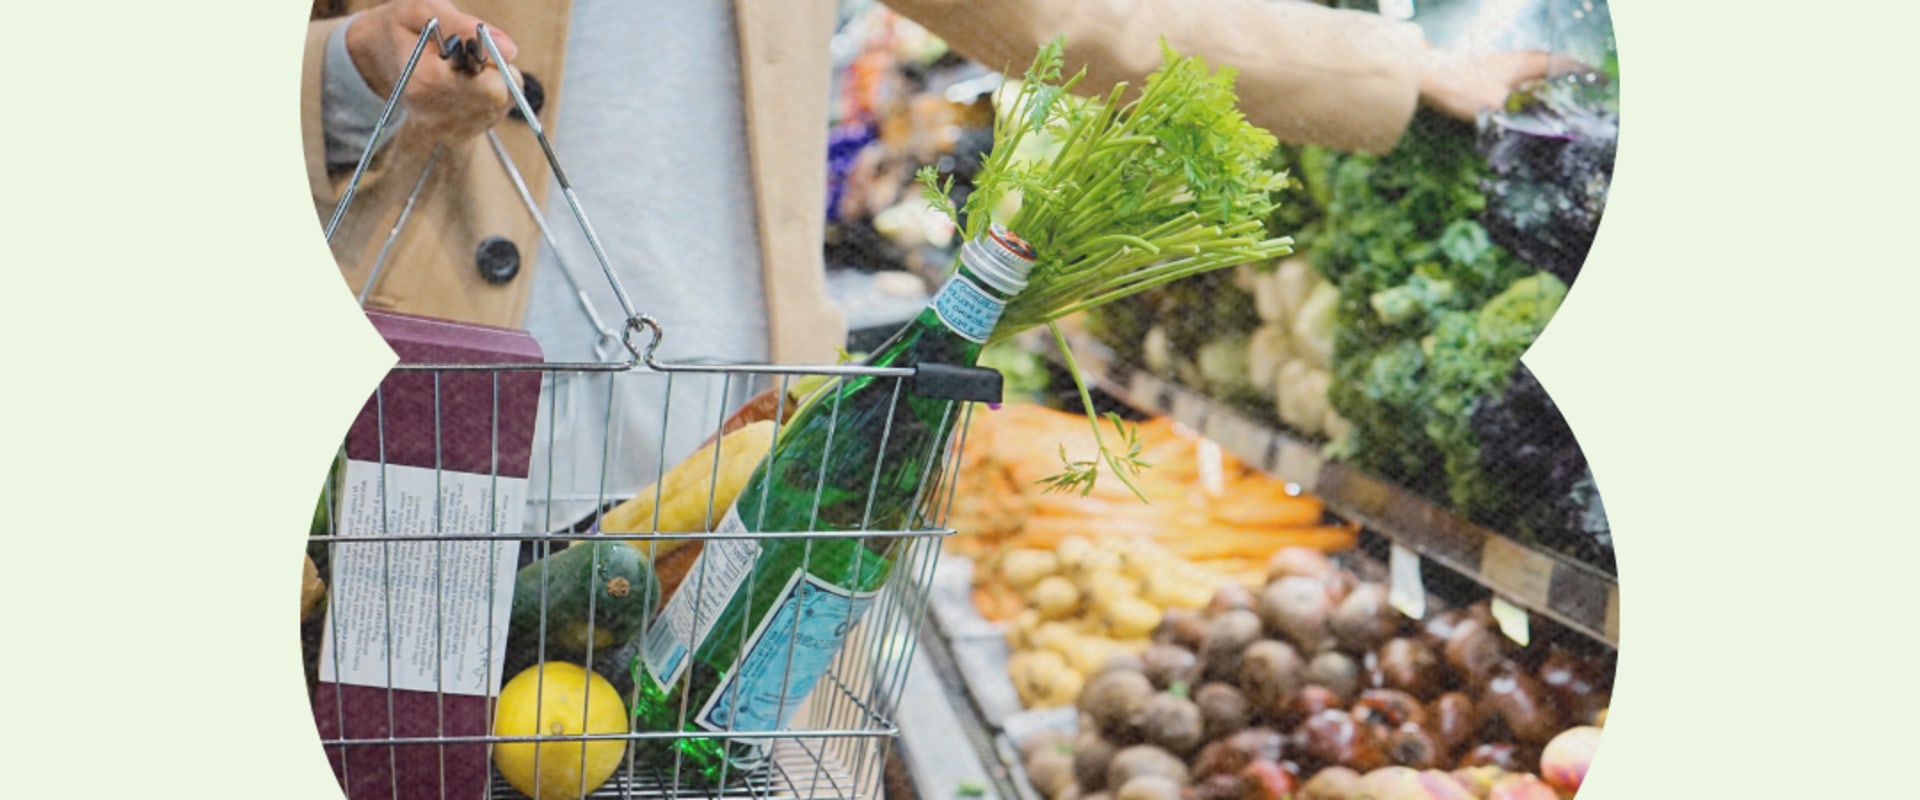 Healthy Shopping List: What to Buy Pre-Made to Save Time and Energy